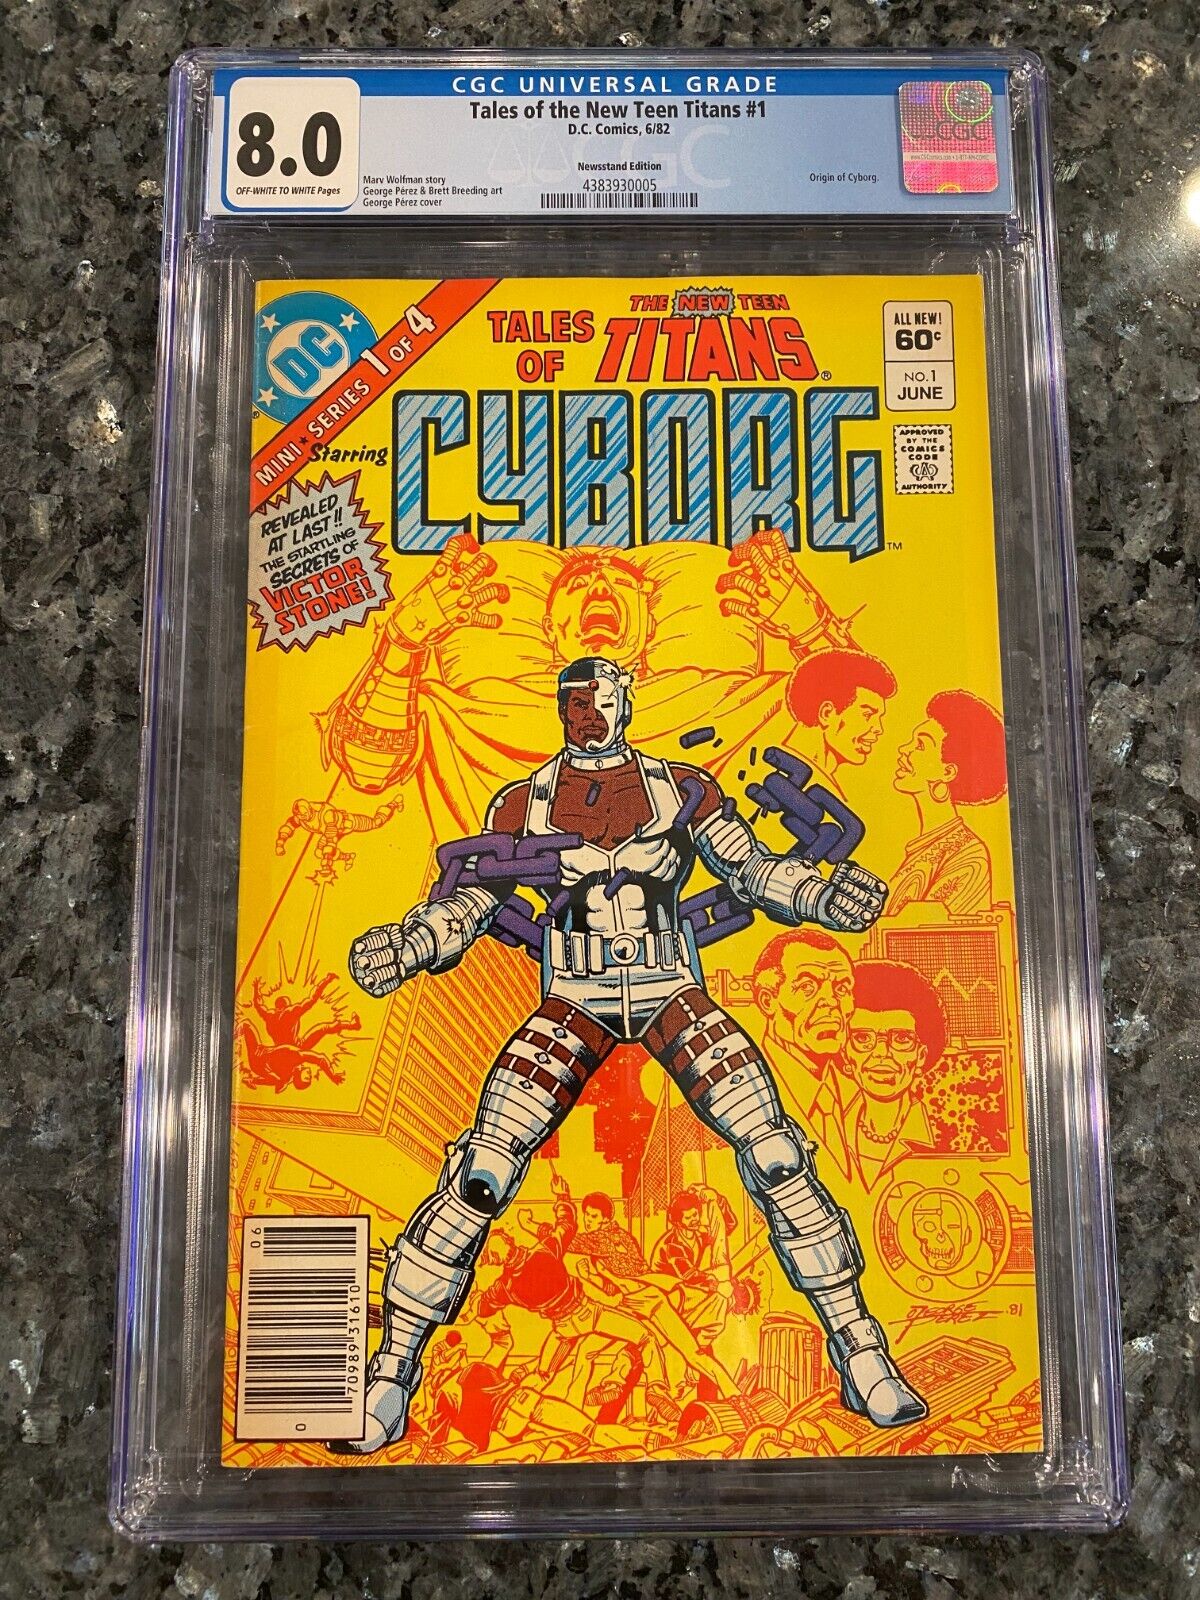 CGC 8.0 Tales of the New Teen Titans #1 - Origin of Cyborg with Off-White/White